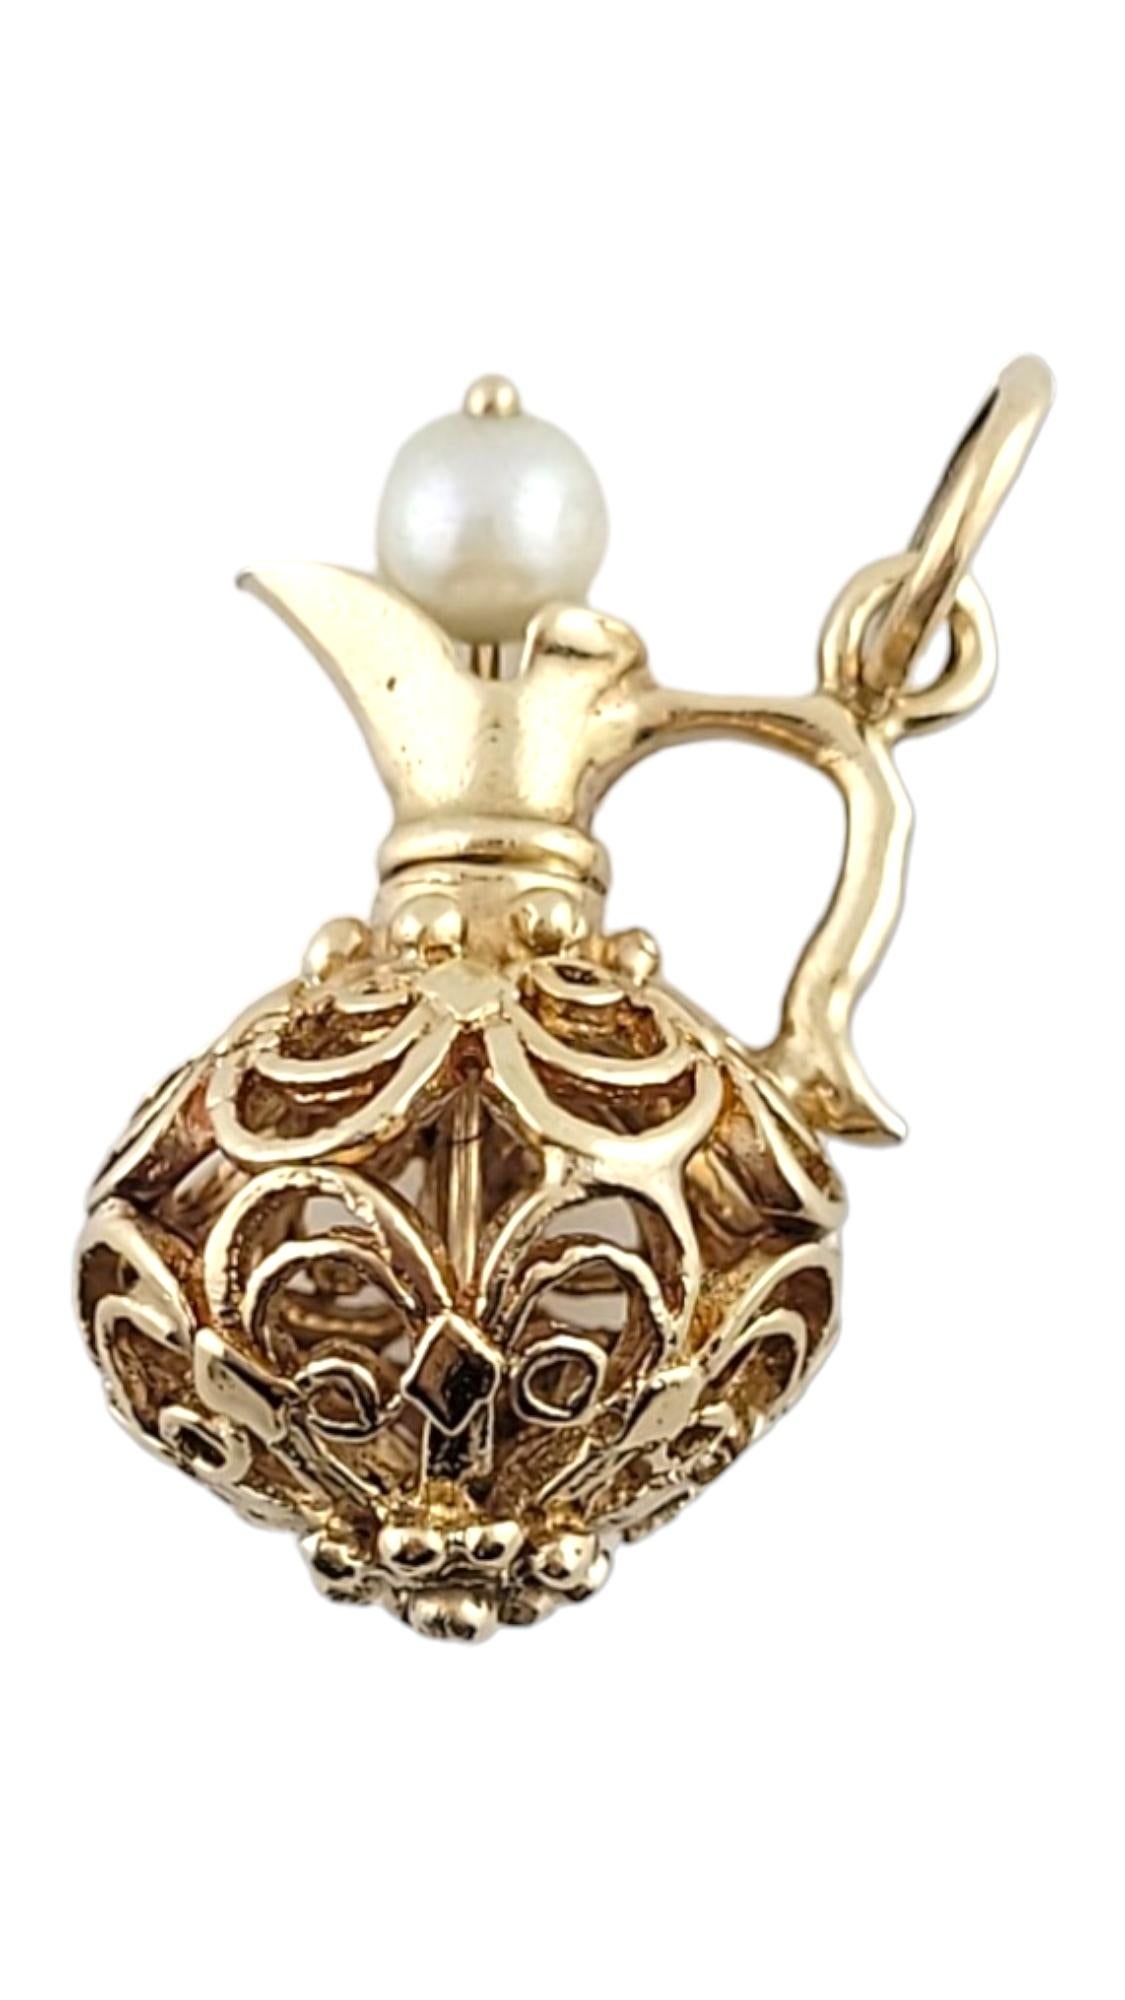 Vintage 14K Yellow Gold Open Design Pitcher Charm with Pearl #15171

This adorable pitcher charm has a beautiful open design with a gorgeous pearl!
(Pearl: 4.5mm)

Size: 23.74mm X 16.45 X 14.42

Weight: 4.3 g/ 2.8 dwt

Hallmark: 14K

Very good